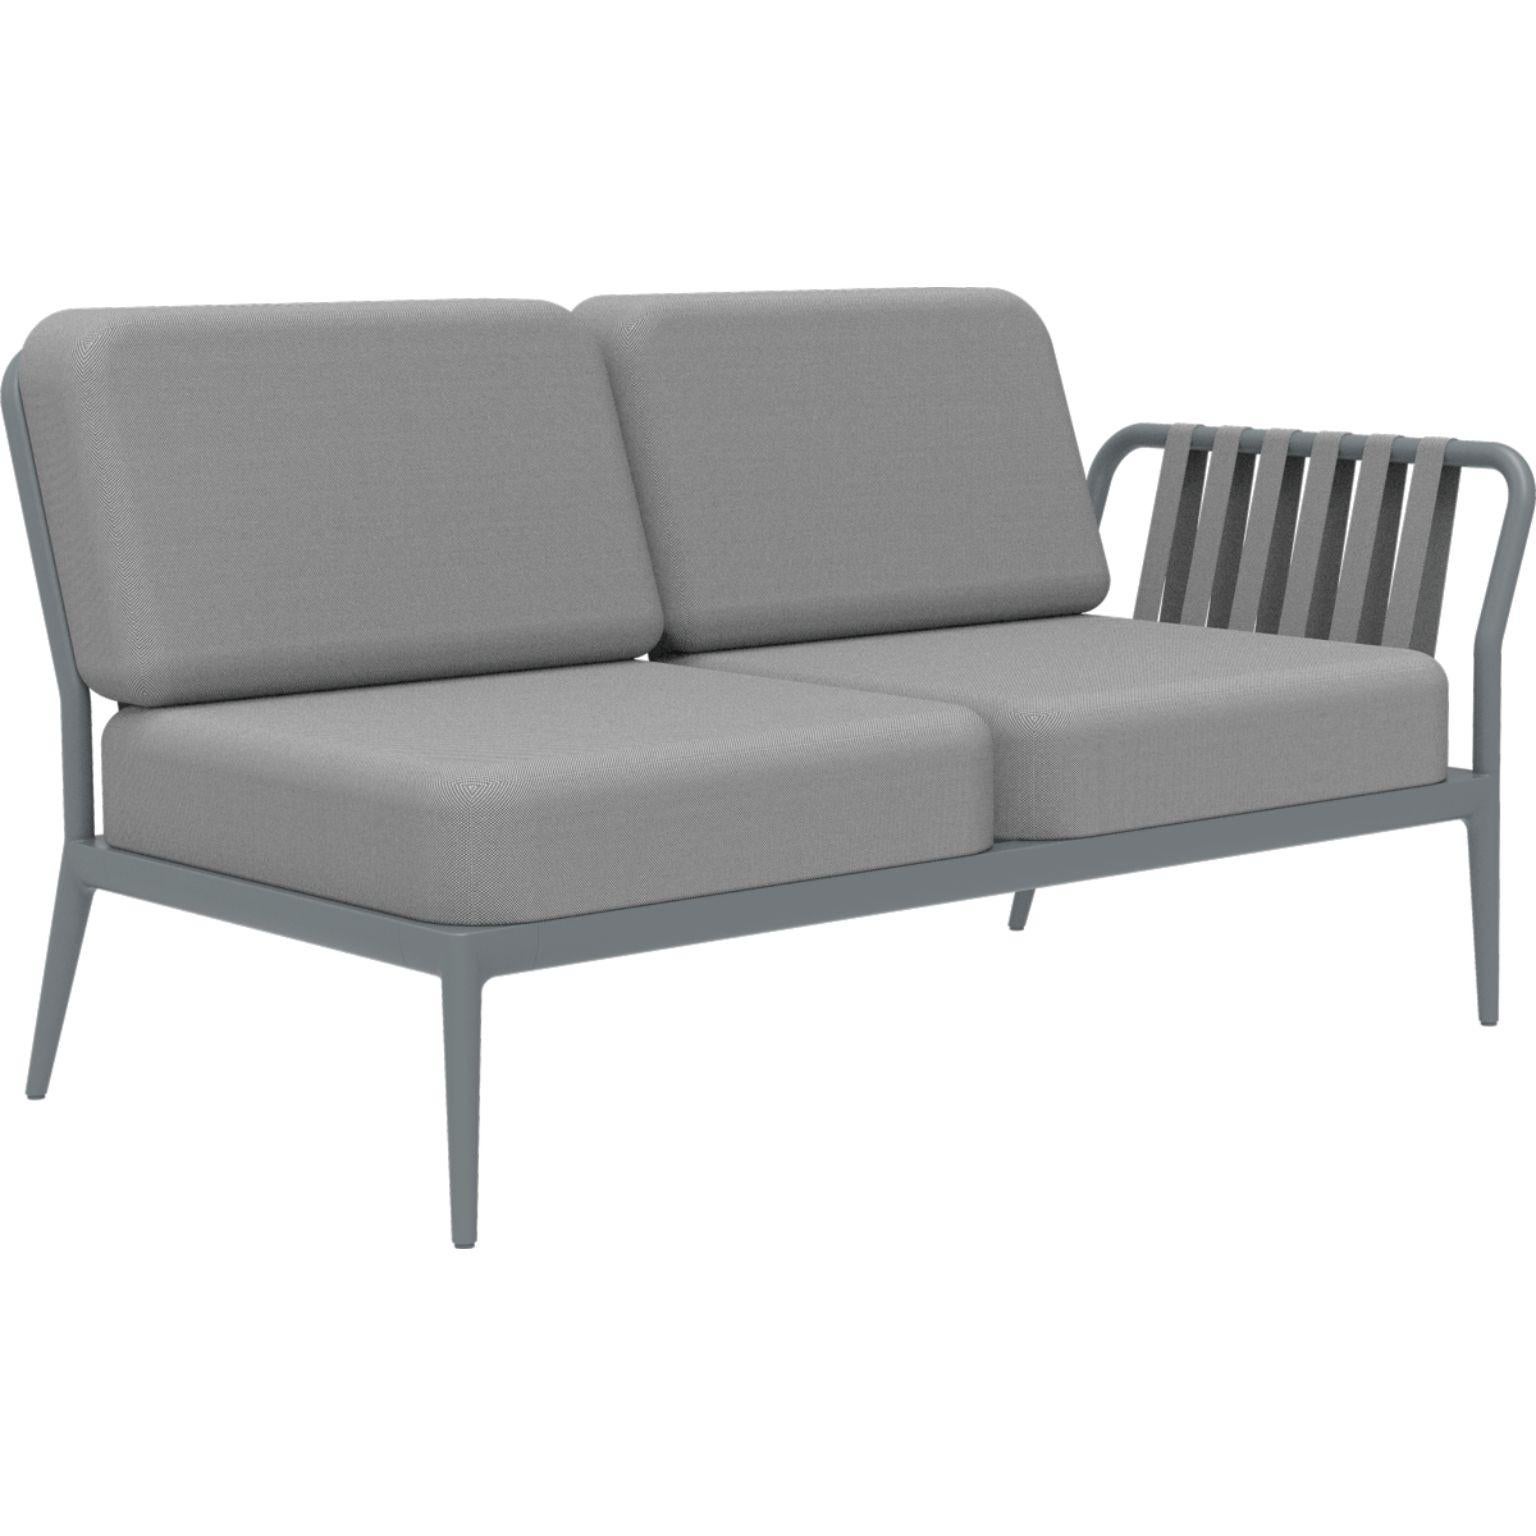 Ribbons grey double left modular sofa by MOWEE
Dimensions: D83 x W148 x H81 cm (seat height 42 cm).
Material: Aluminium and upholstery.
Weight: 29 kg
Also available in different colors and finishes.

An unmistakable collection for its beauty